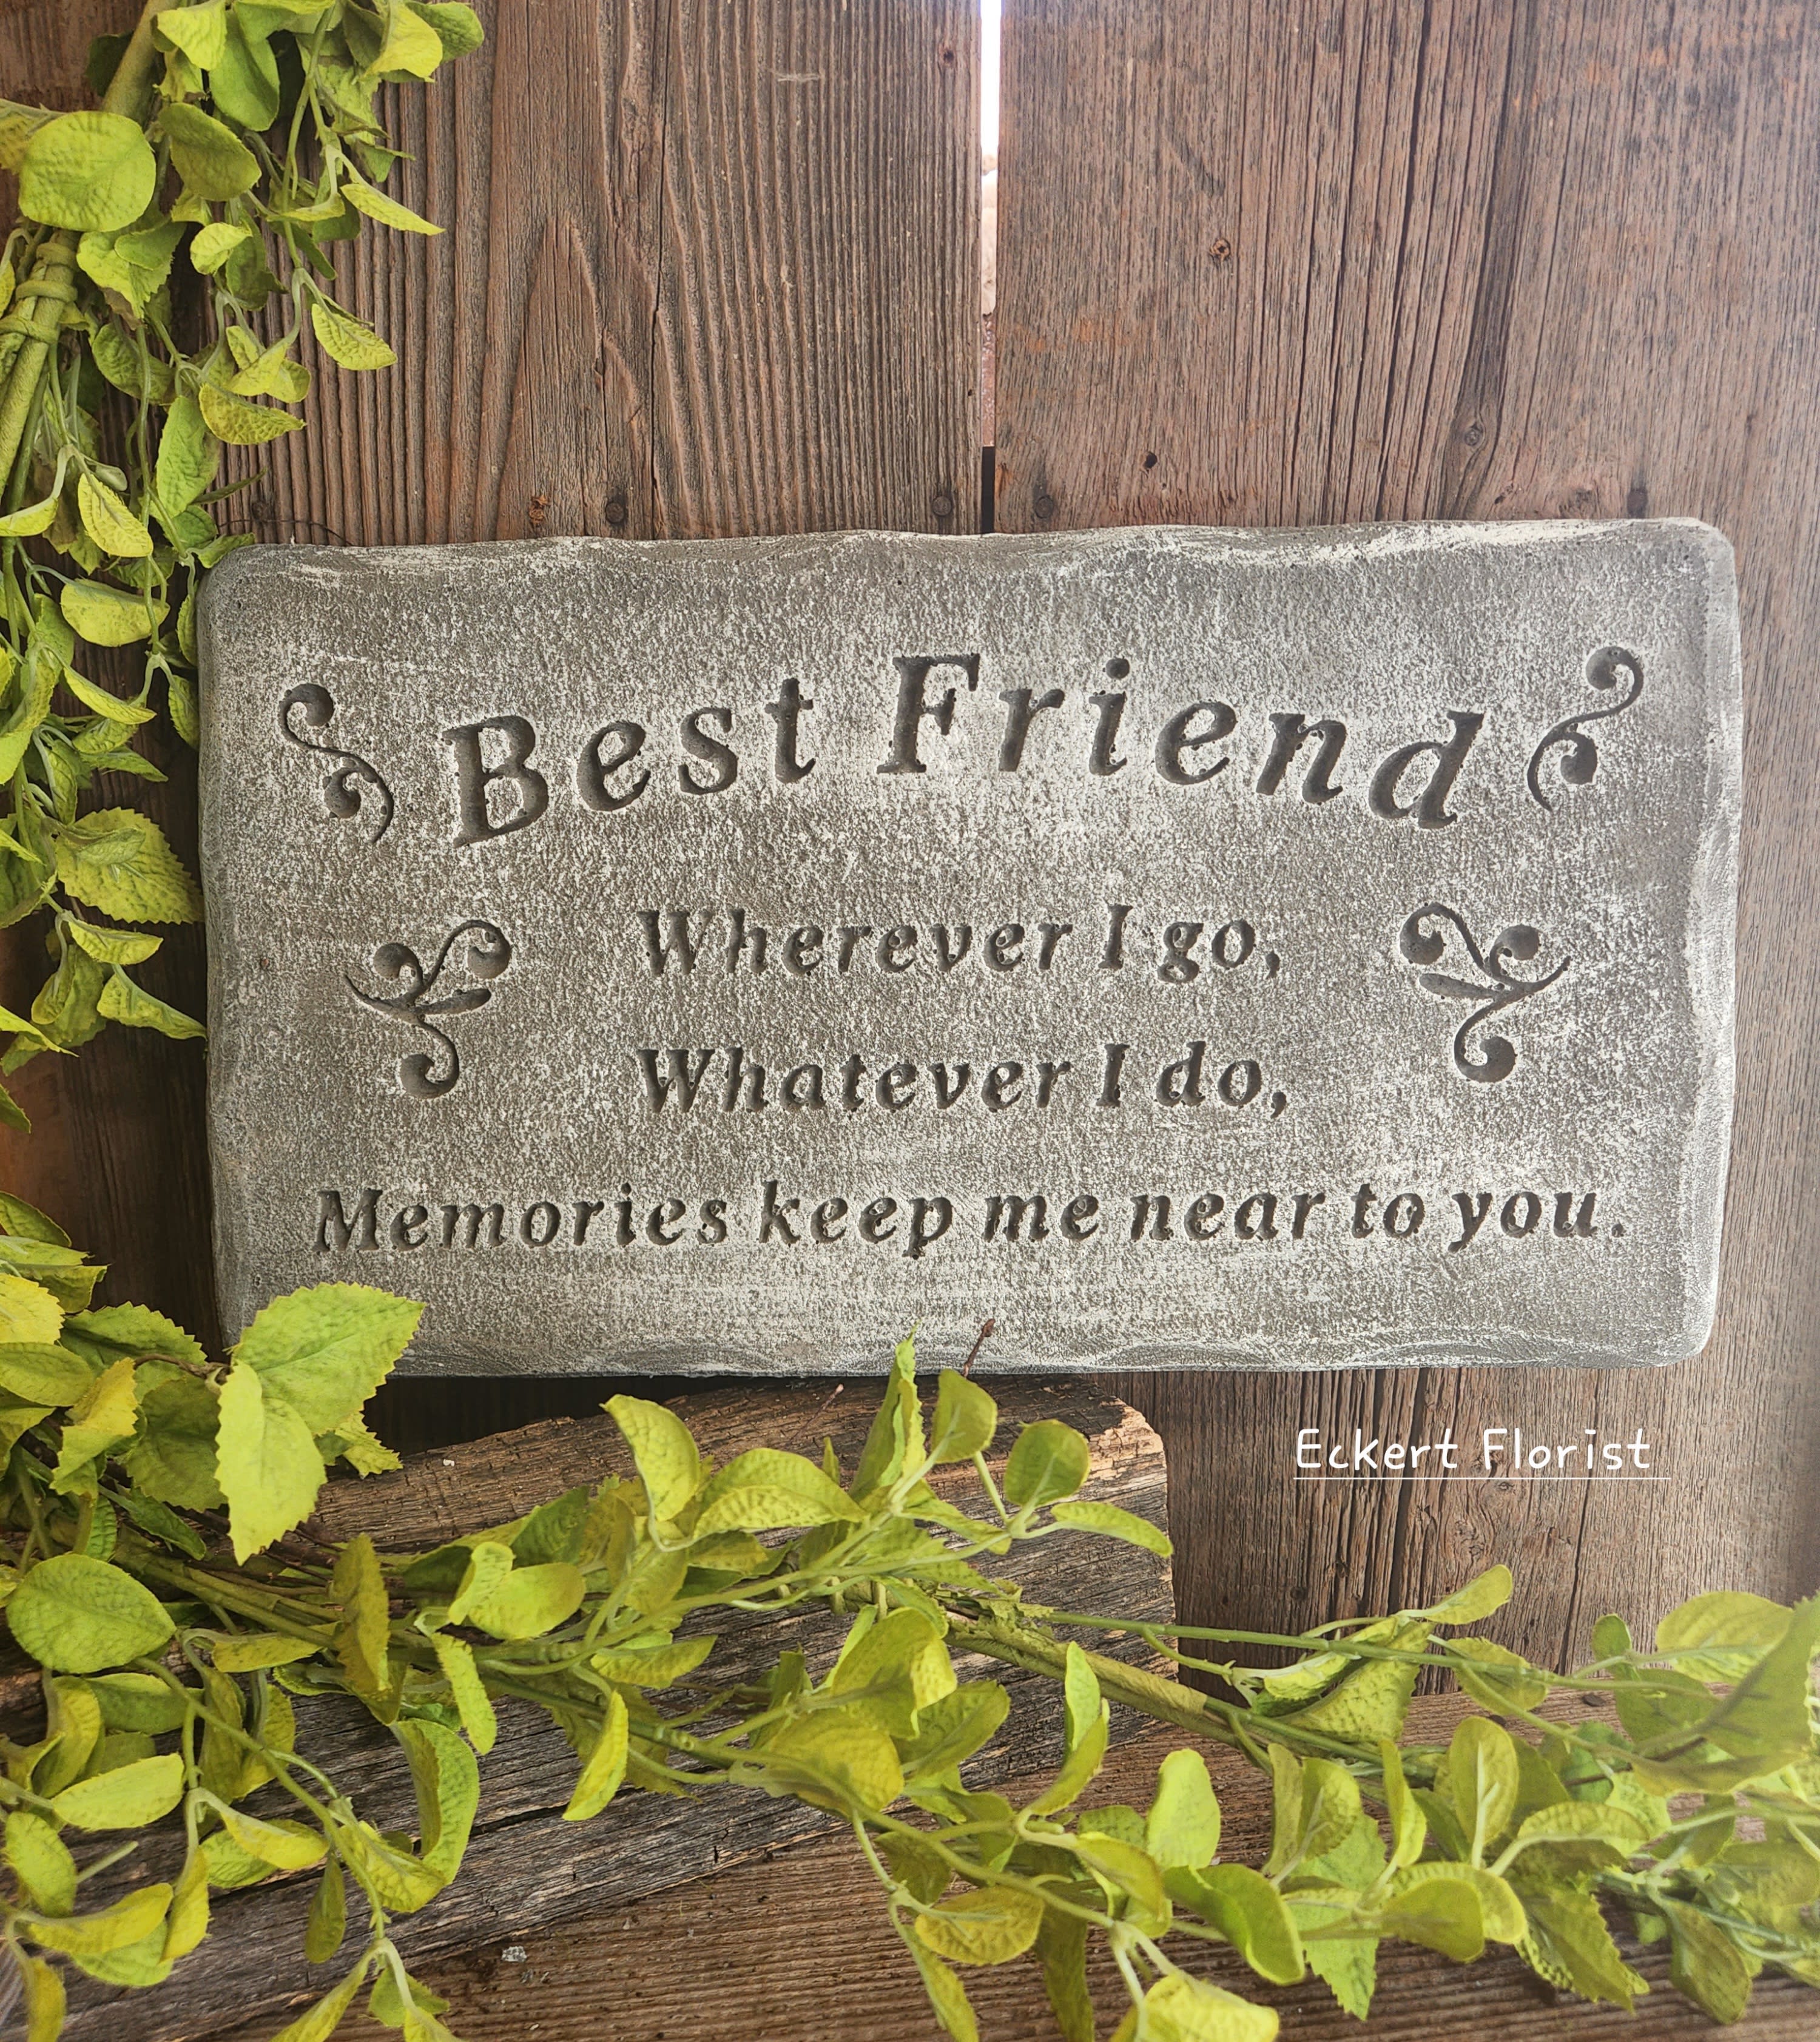 Eckert Florist's &quot;Best Friend...&quot; Memorial Stone - *Our Local Delivery Only &quot;Best Friend - Wherever I go, Whatever I do, Memories keep me near to you.&quot; Cement Stone measures approx. 10&quot; H X 17.5&quot; W *Stand Included *Upgrade with artificial flowers. See Deluxe option. ALL OF OUR STONES COME DECORATED WITH A SHEER BOW, WILLOW, RAFFIA, AND OUR SIGNATURE BIRD.